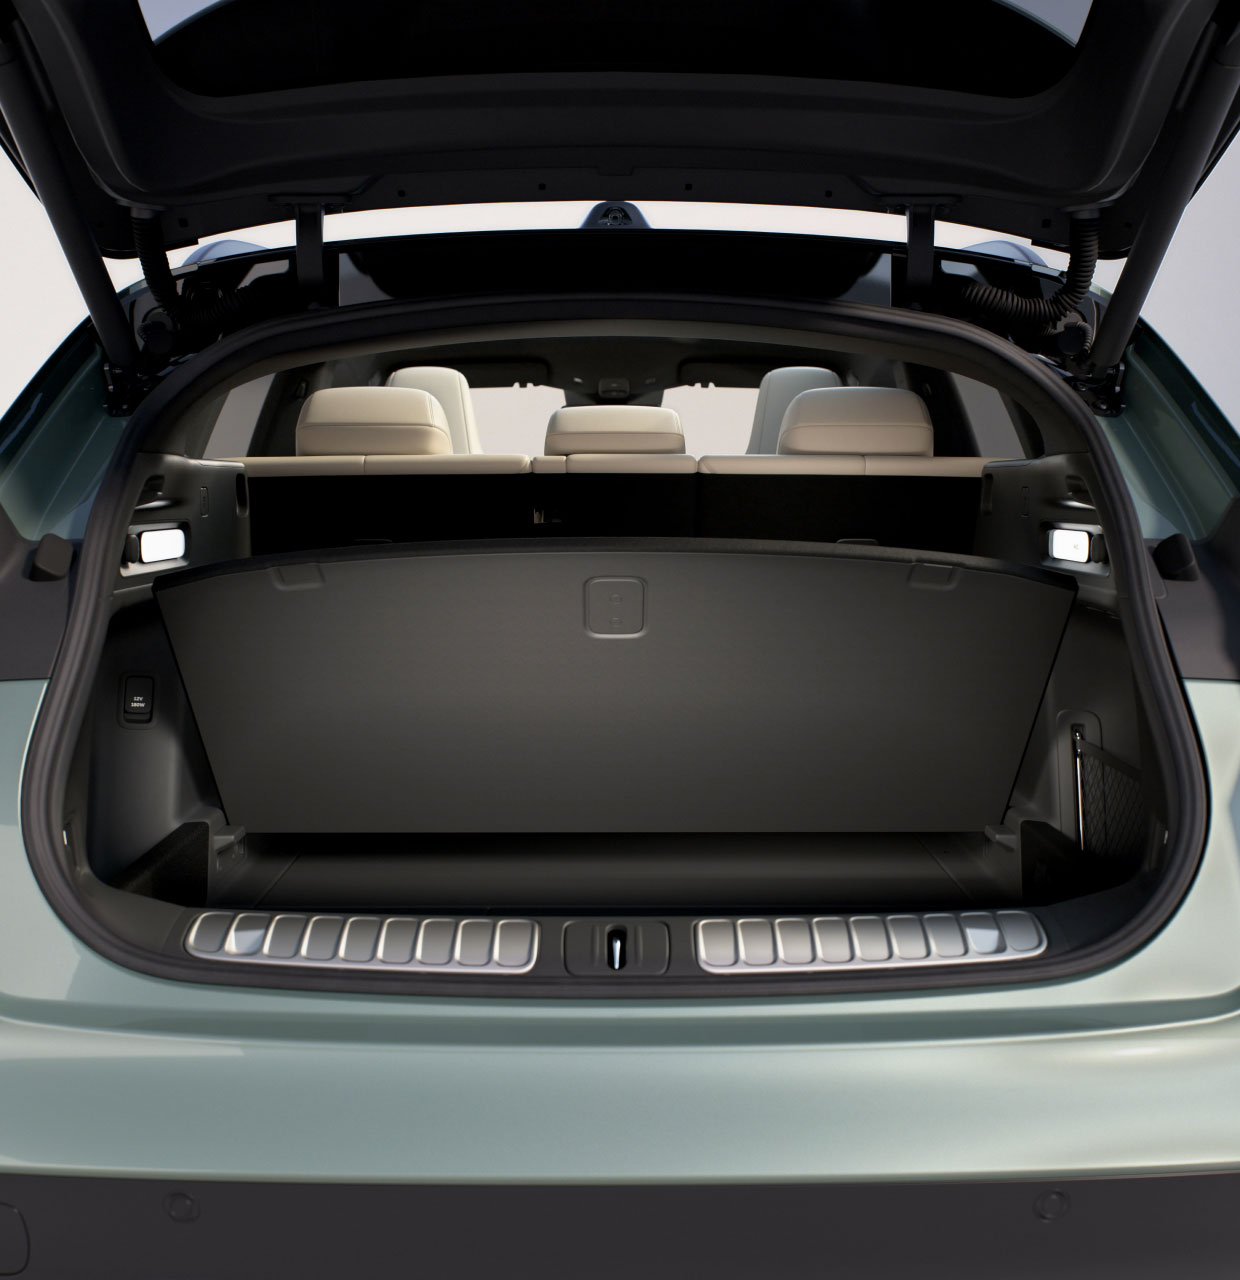 Additional Trunk Space